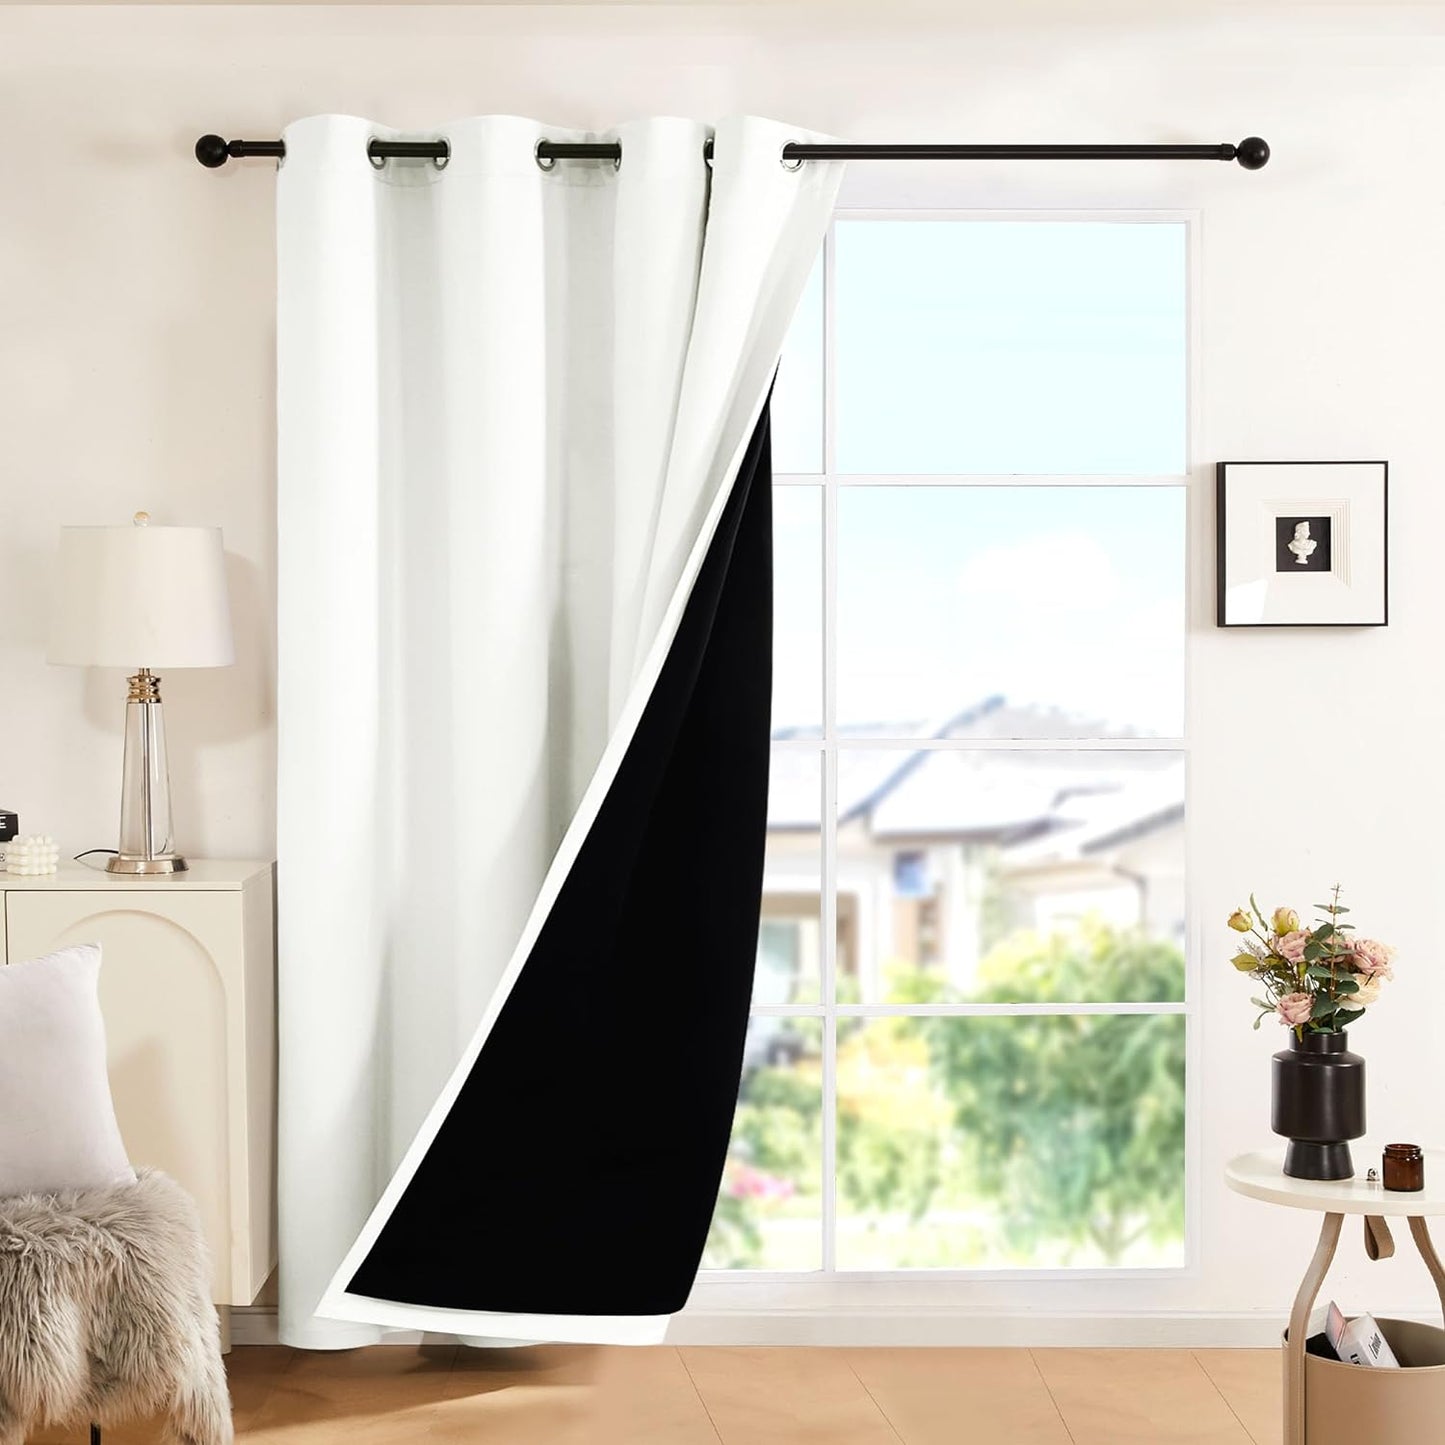 Deconovo 100% White Blackout Curtains, Double Layer Sliding Door Curtain for Living Room, Extra Wide Room Divder Curtains for Patio Door (100W X 84L Inches, Pure White, 1 Panel)  DECONOVO Cream 52W X 84L Inch 